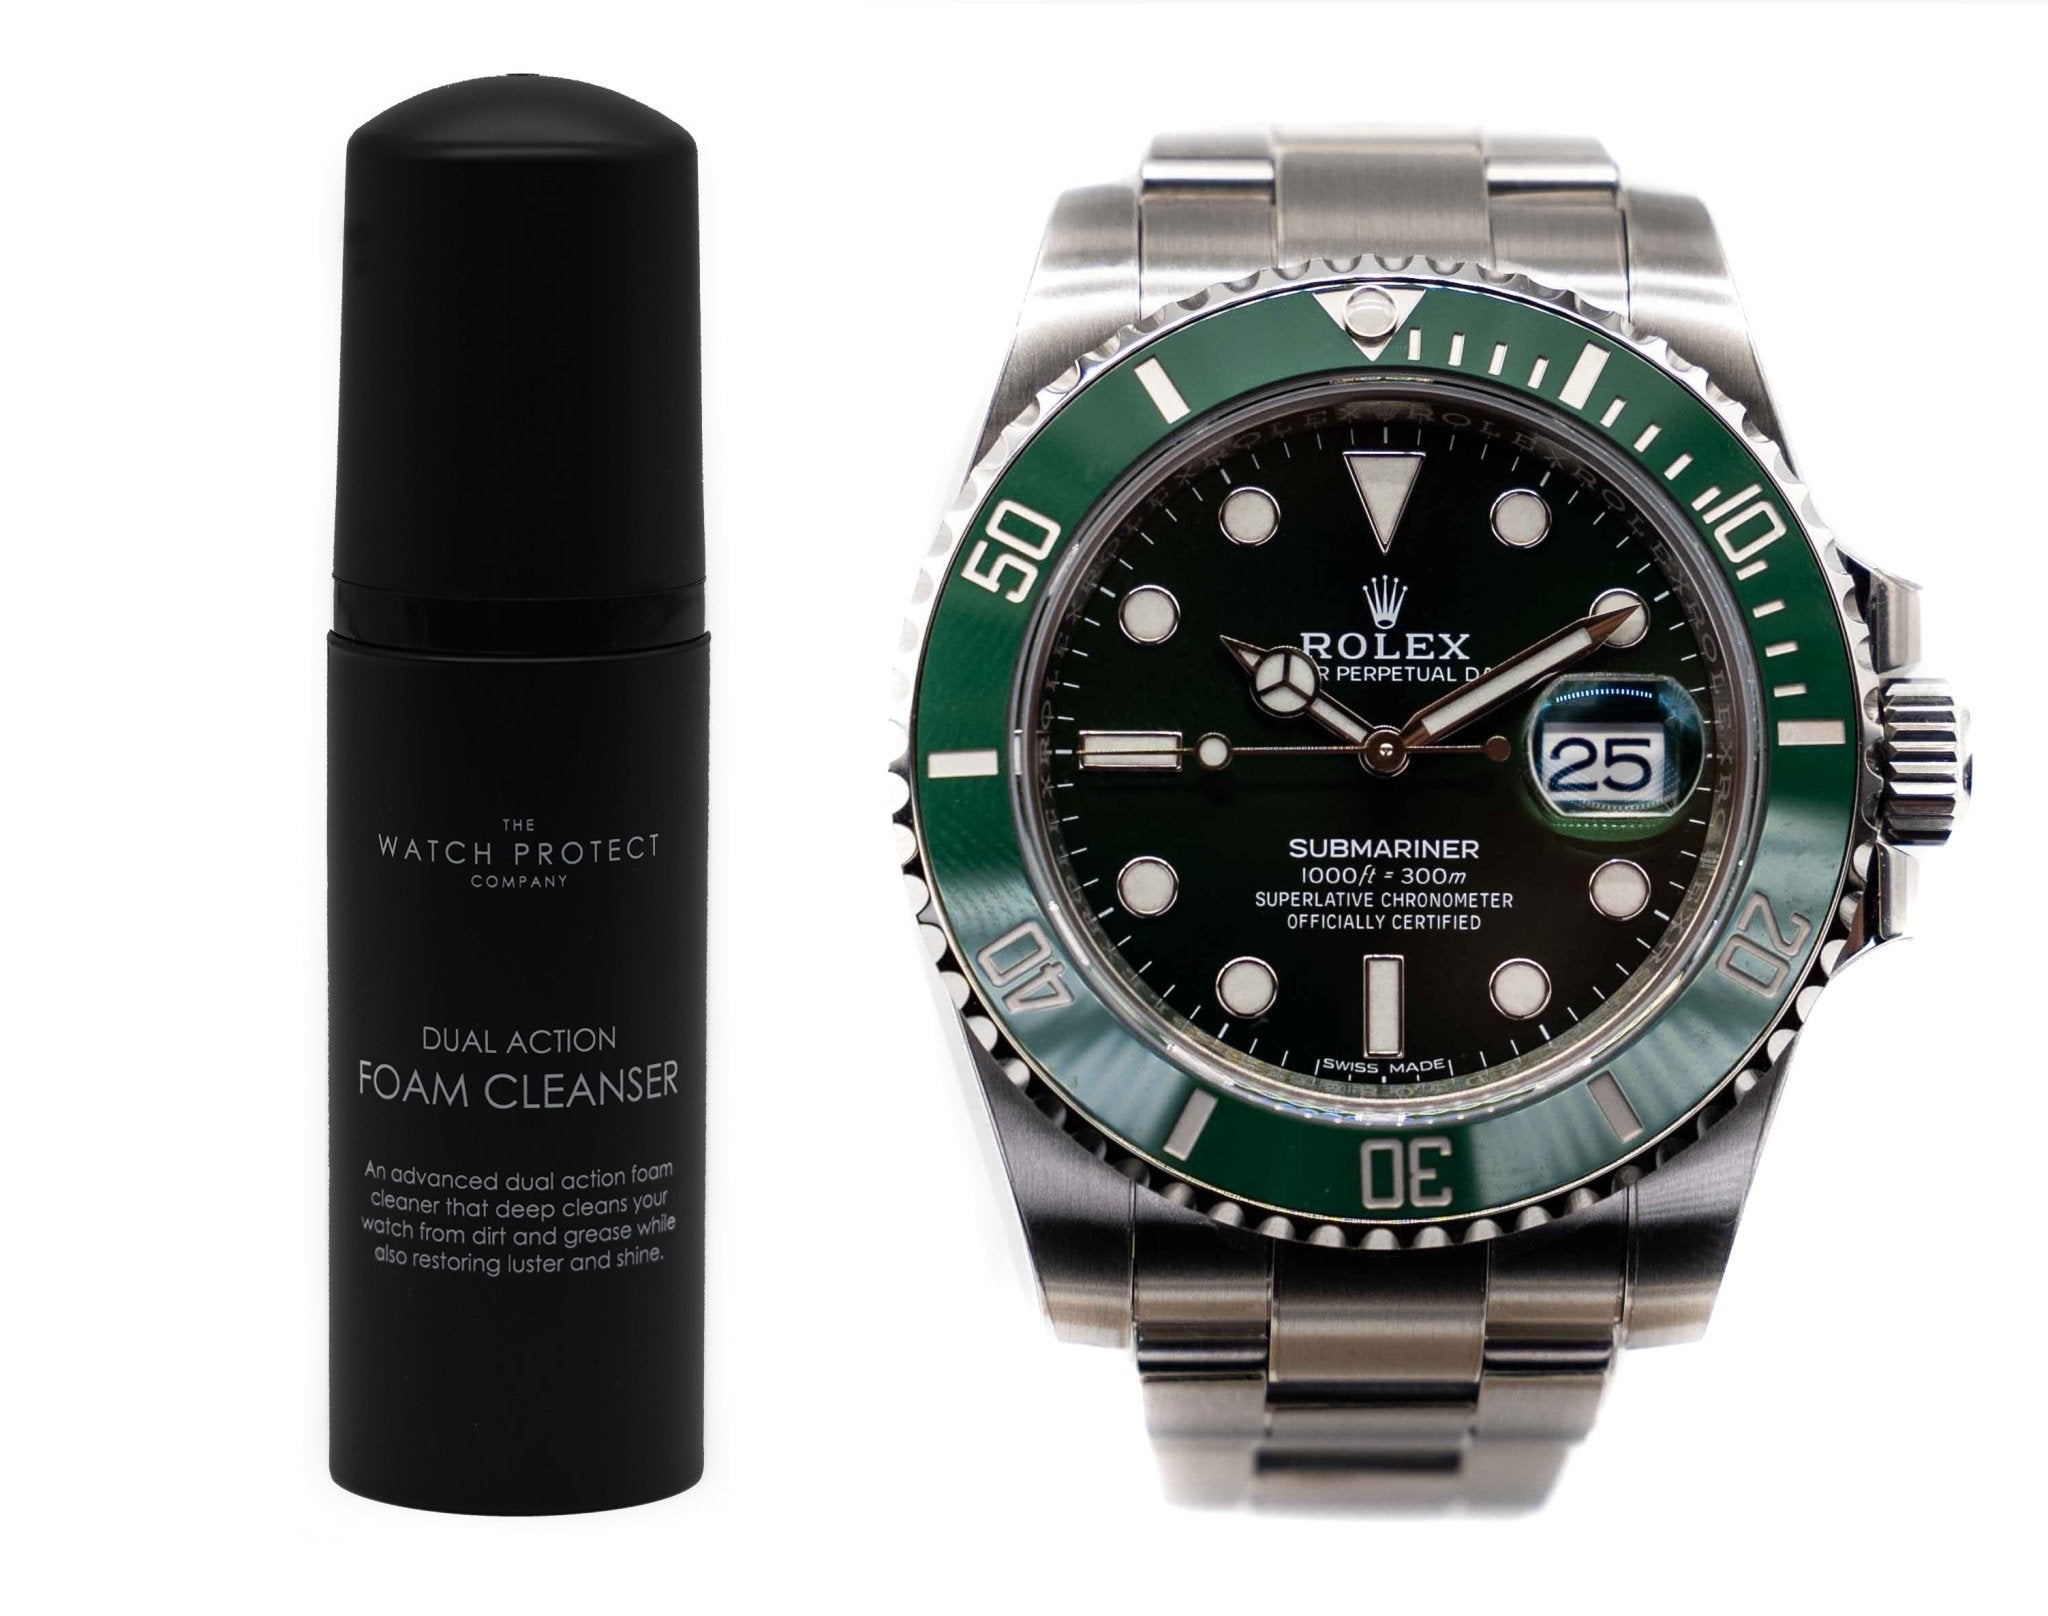 DUAL ACTION FOAM CLEANER & ROLEX SUBMARINER 116610/114060 - TIER 3 - WATCH PROTECTION KIT BUNDLE - The Watch Protect Company